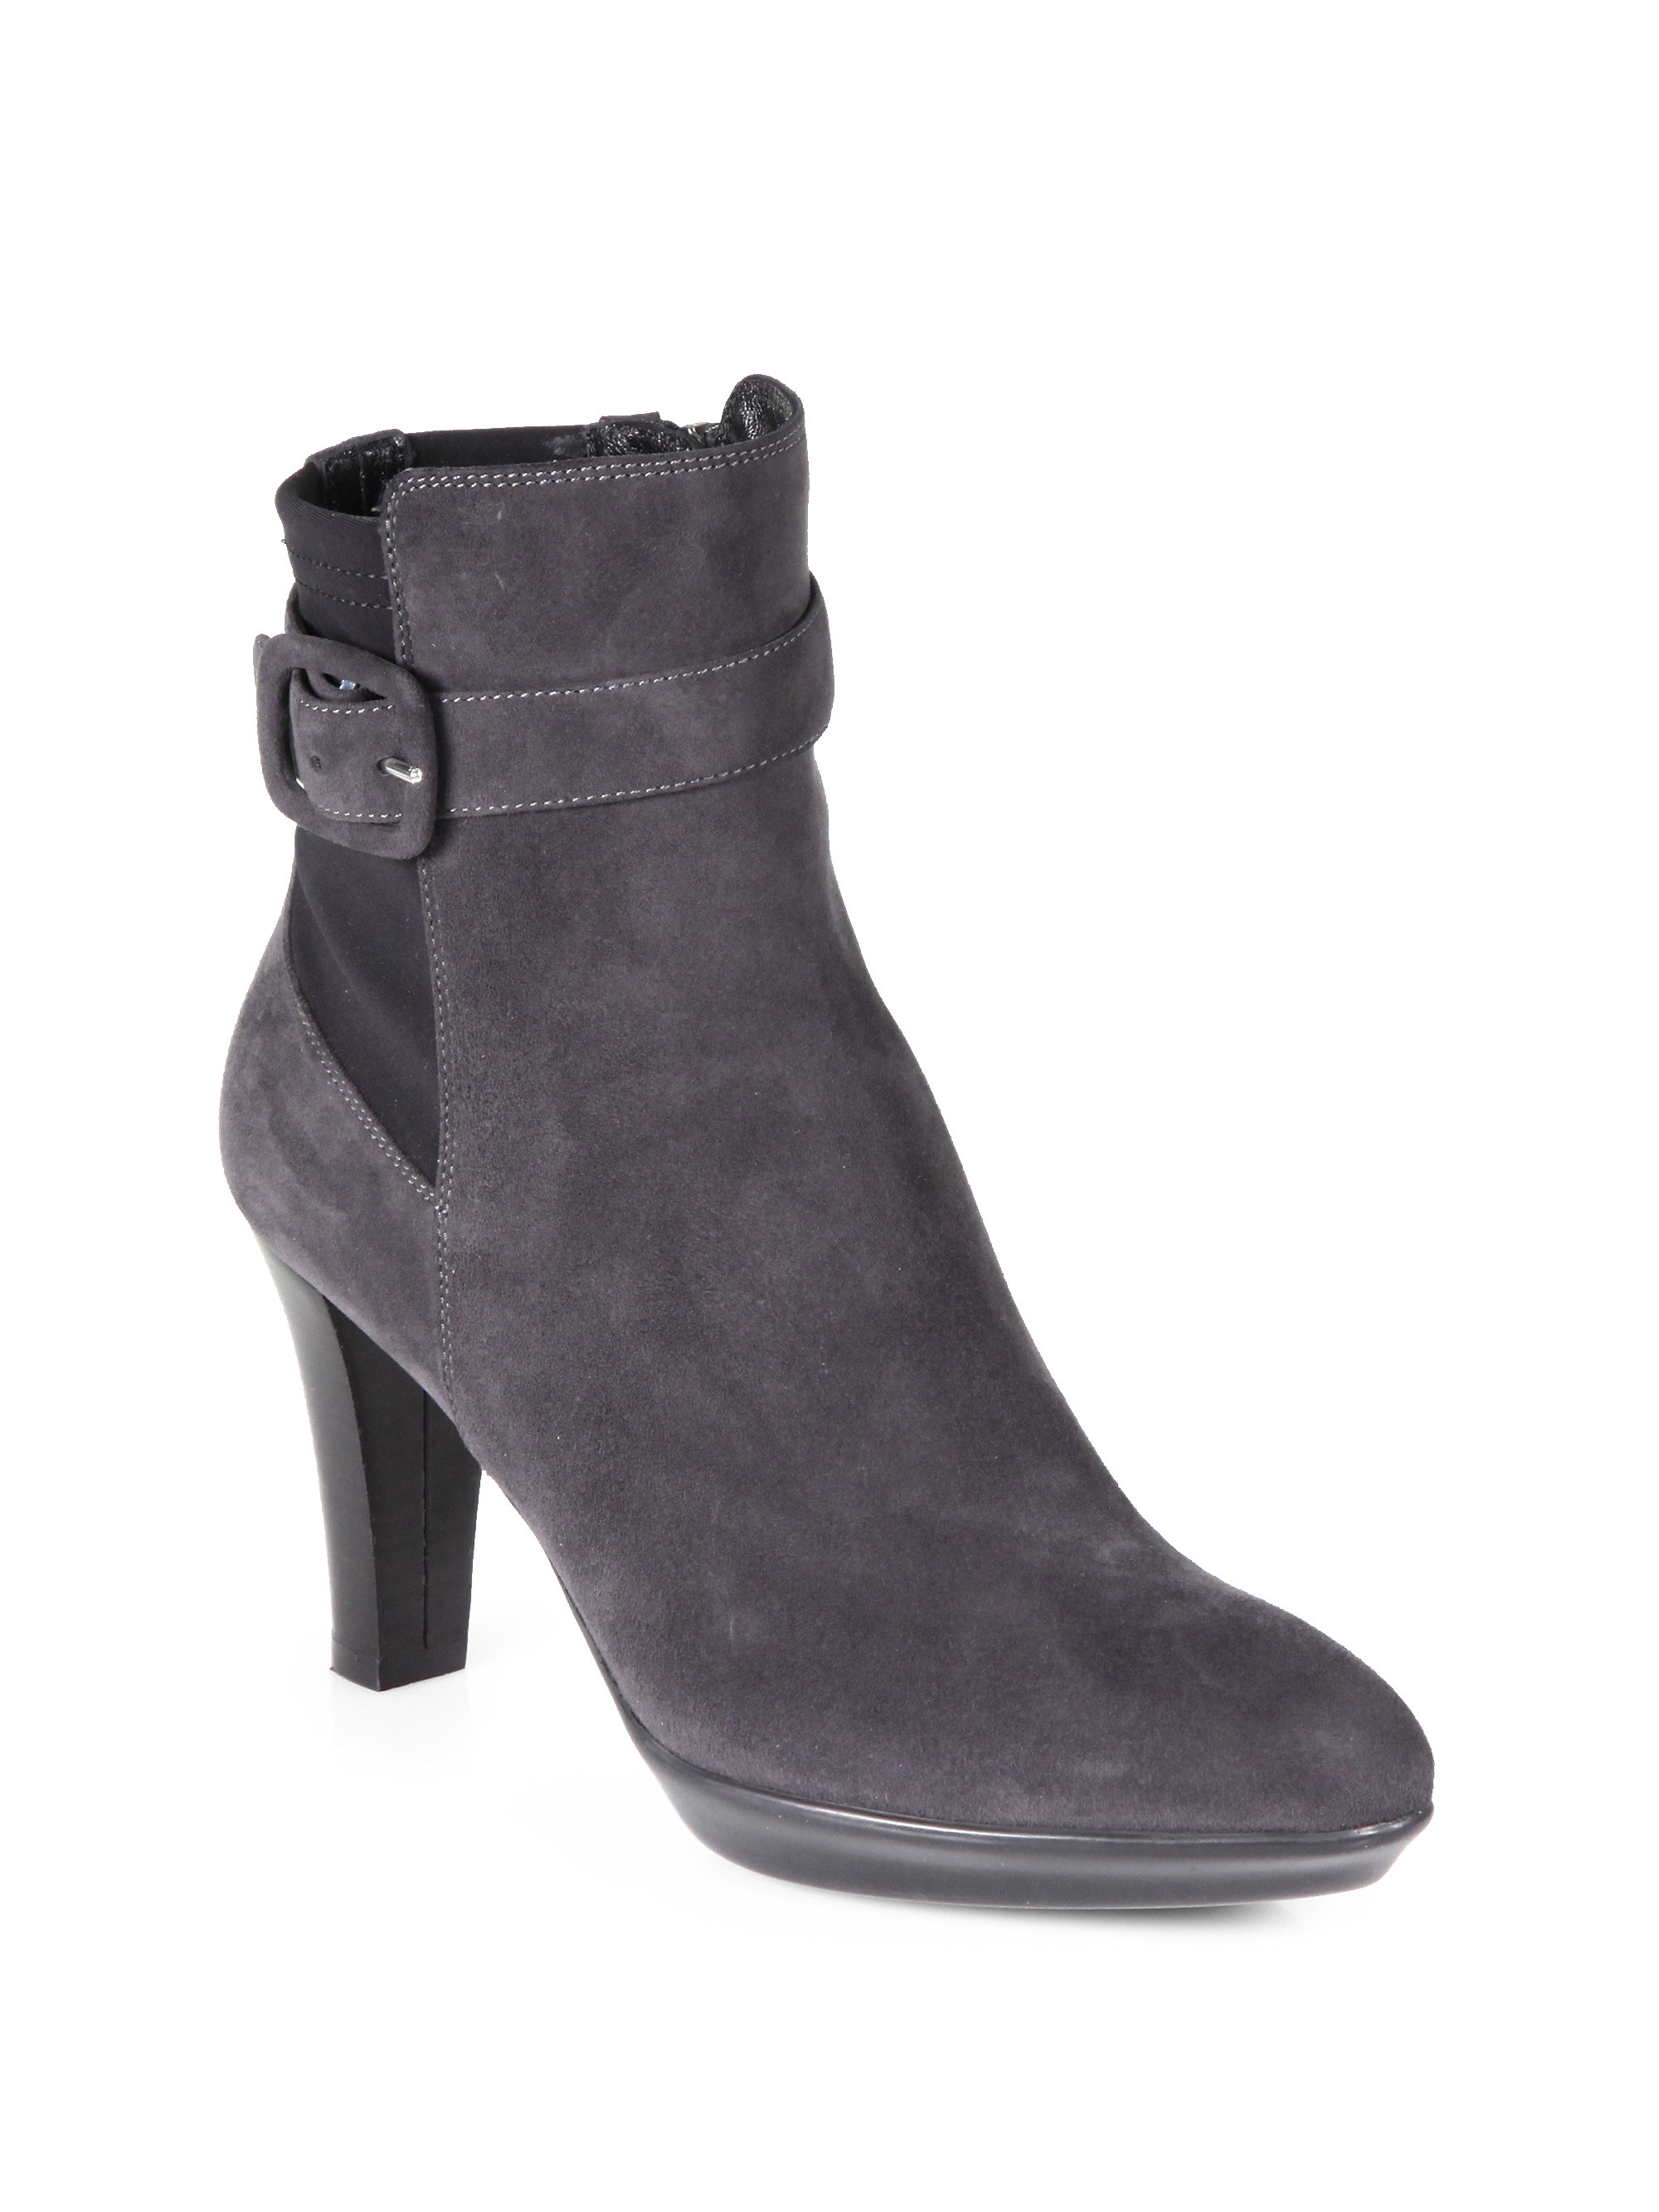 Aquatalia By Marvin K Rexana Suede Platform Ankle Boots in Gray (GREY ...